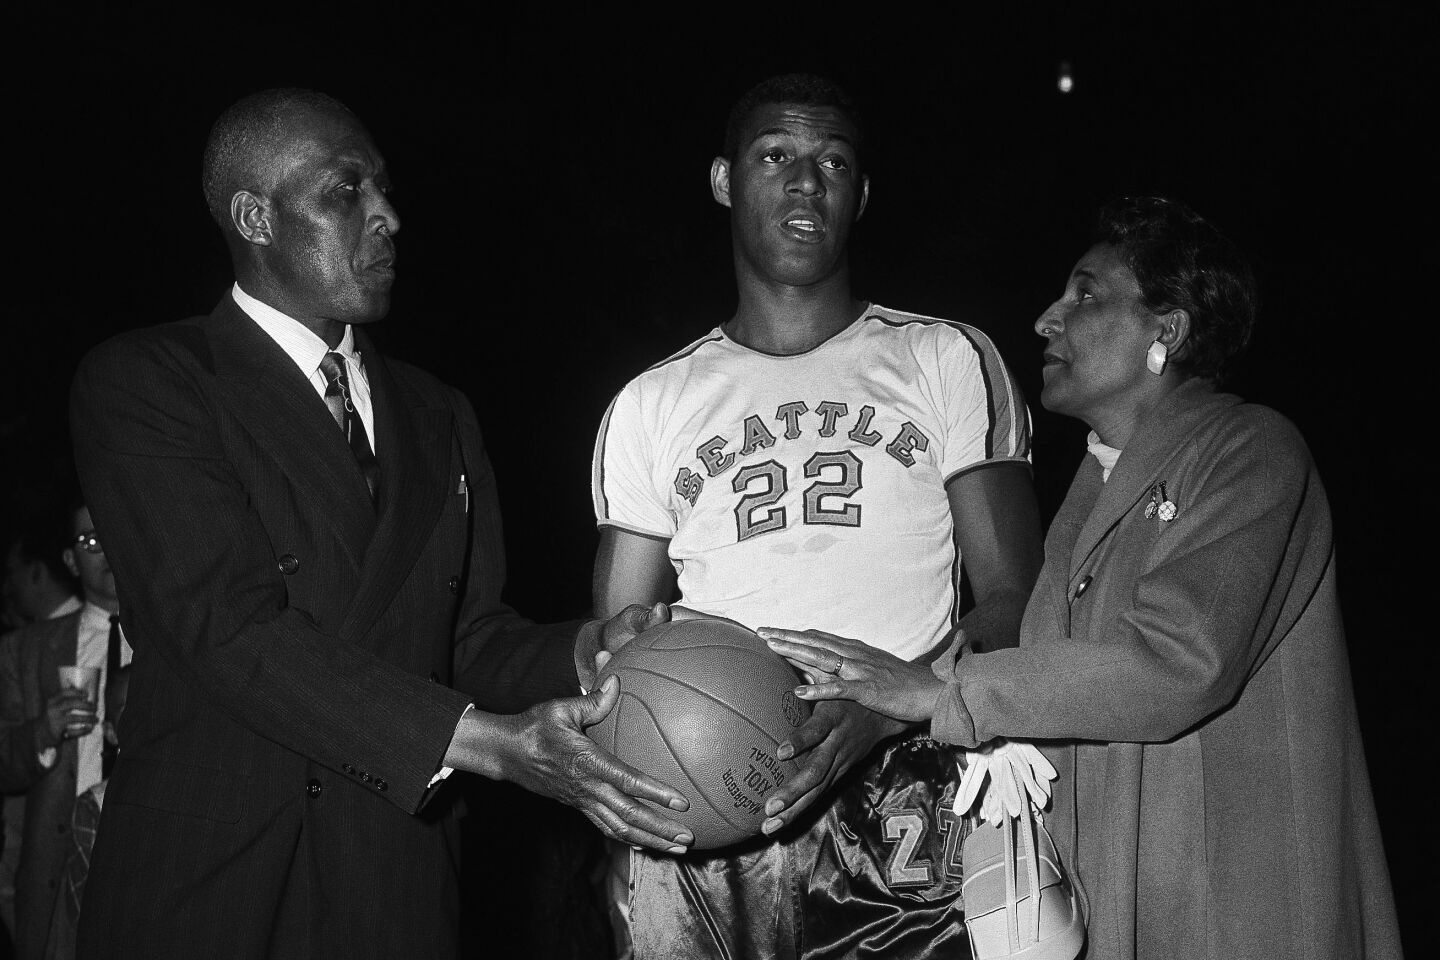 Mr. and Mrs. John W. Baylor with their son Elgin as he gets ready to play for the Seattle University team in the National Invitation Tournament in Madison Square Garden in New York on March 18, 1957.